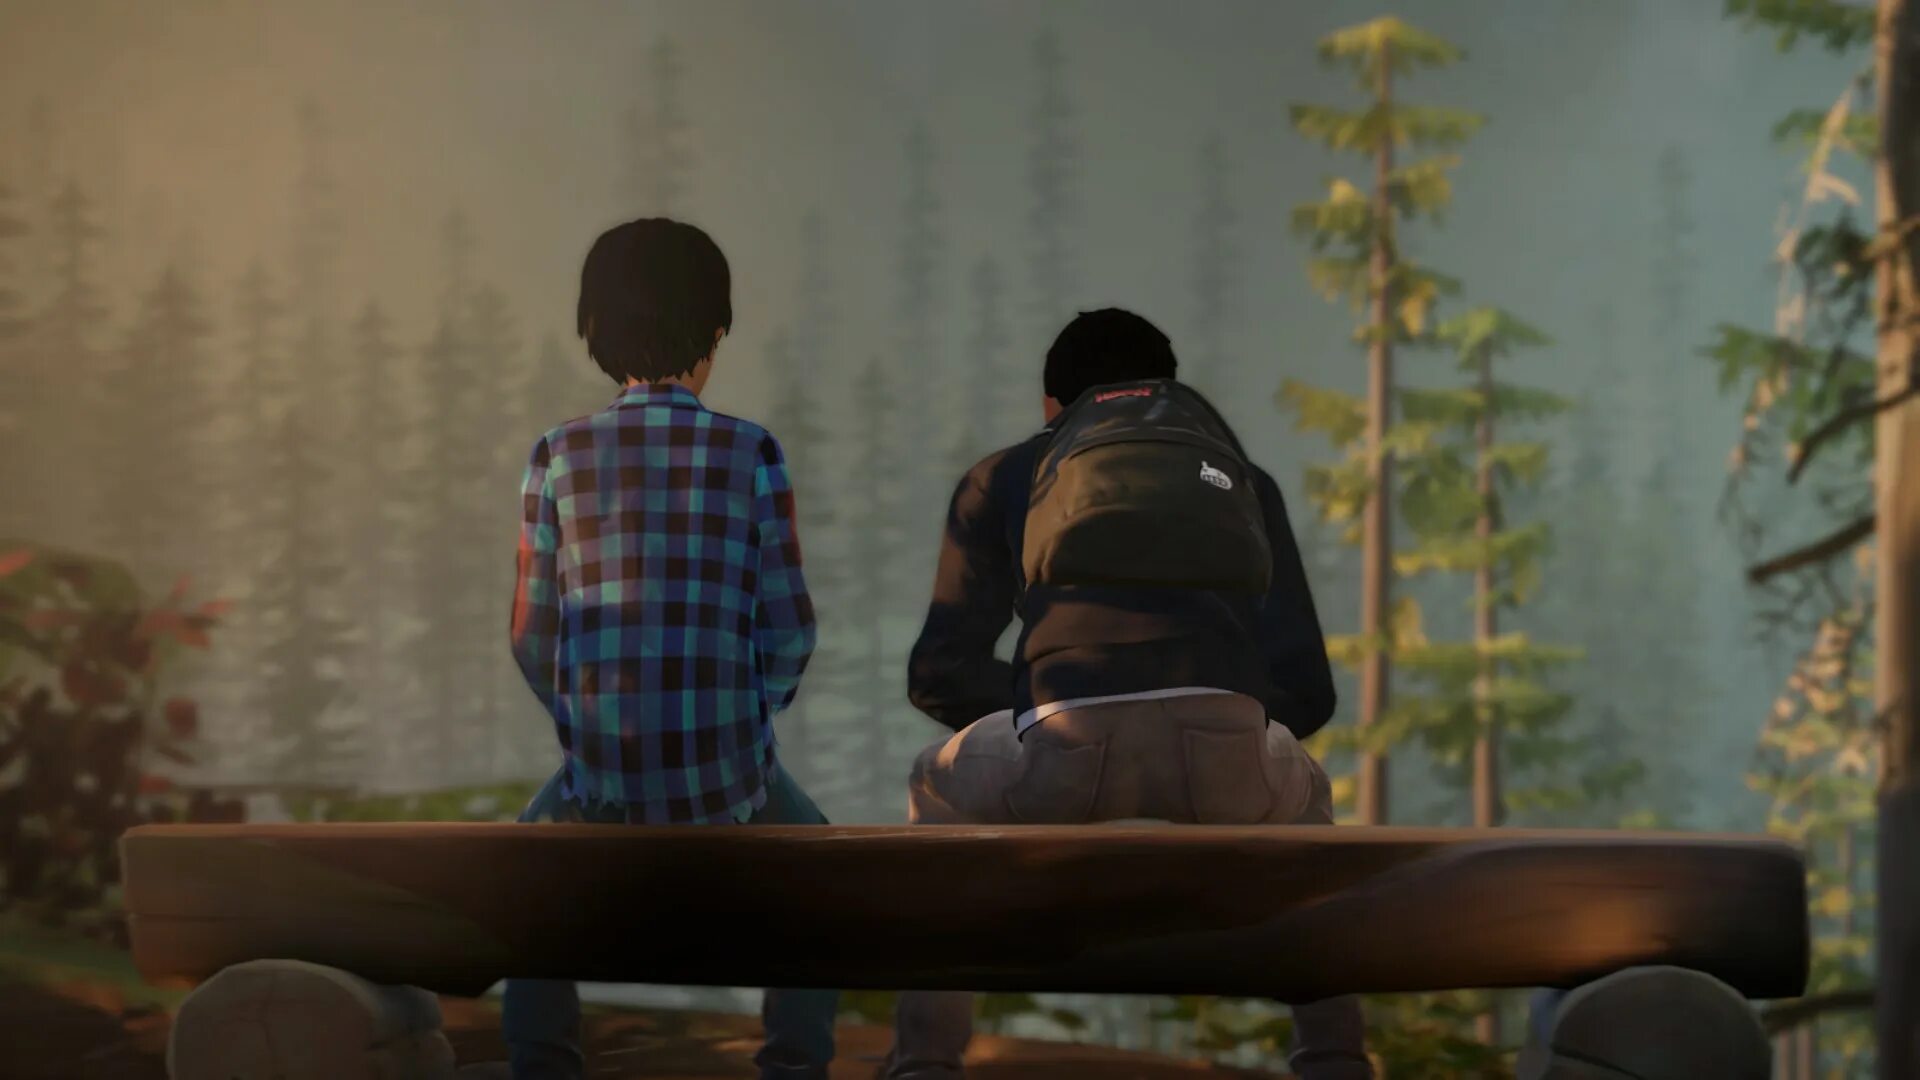 Life is searching. Life is Strange 2 1 эпизод. Life is Strange 2 Episode 2. Life is Strange 2 эпизод 1: дороги. Life is Strange 2 Episode 4.